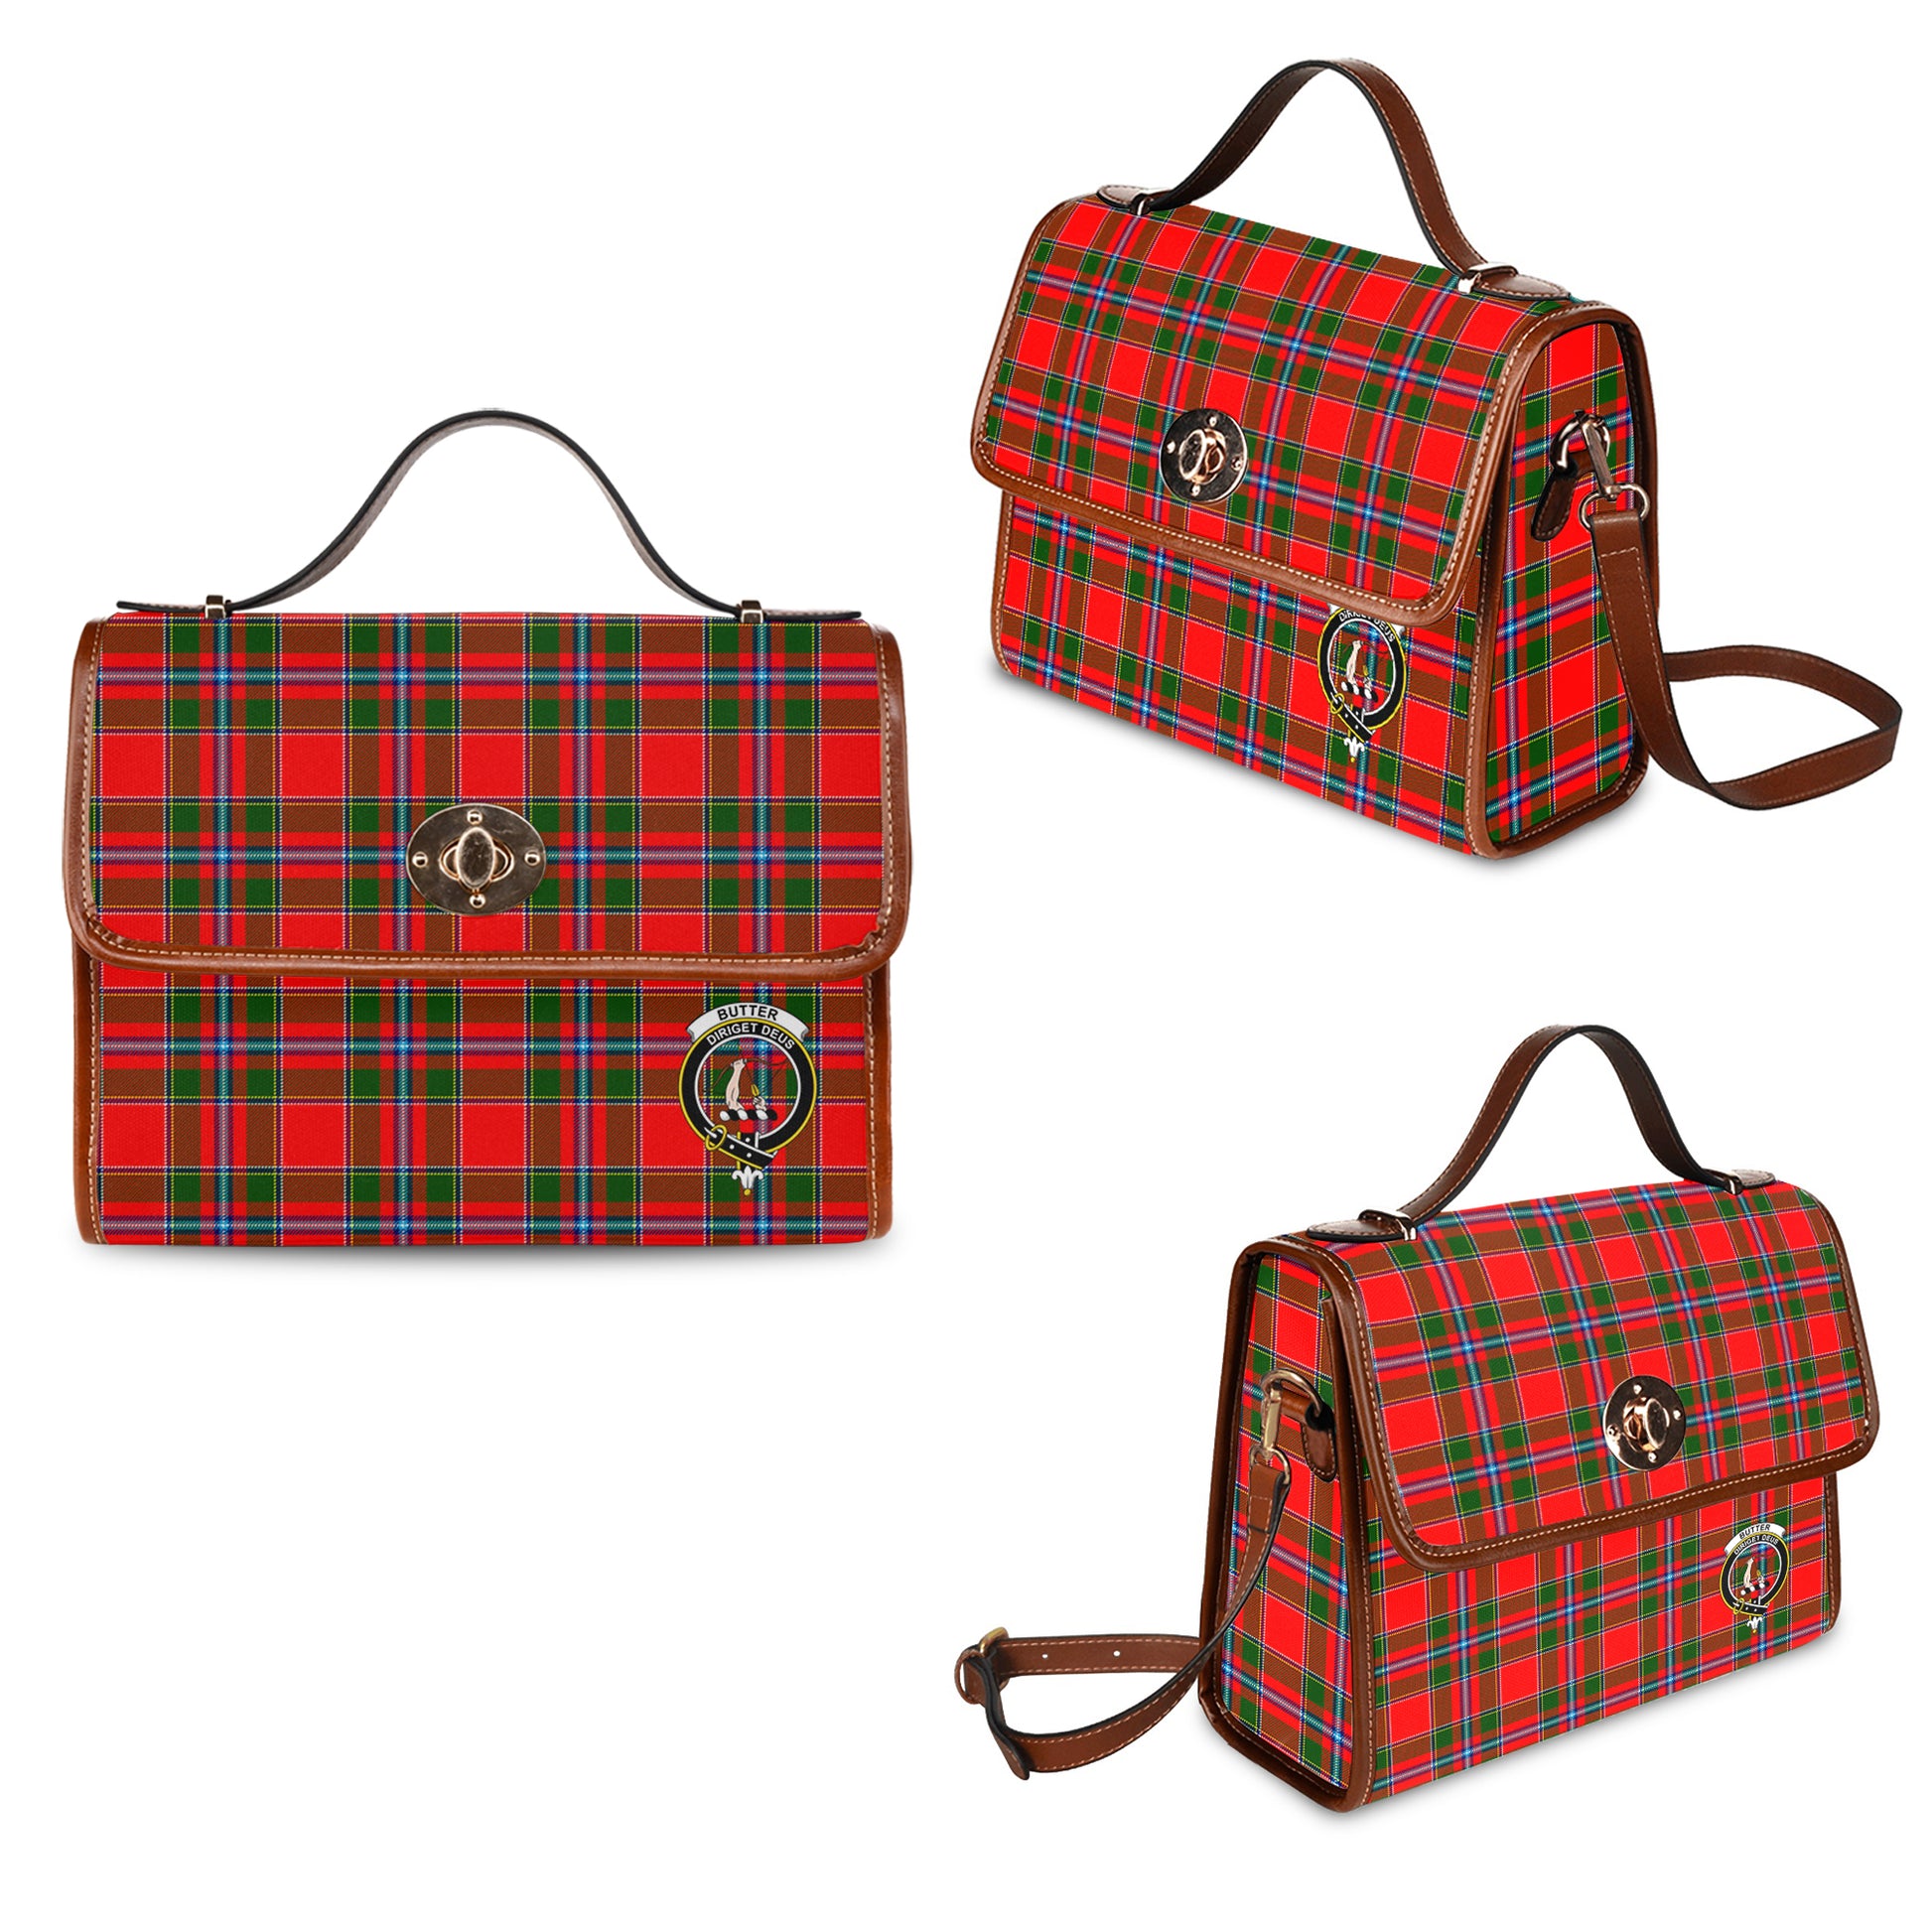 Butter Tartan Leather Strap Waterproof Canvas Bag with Family Crest One Size 34cm * 42cm (13.4" x 16.5")